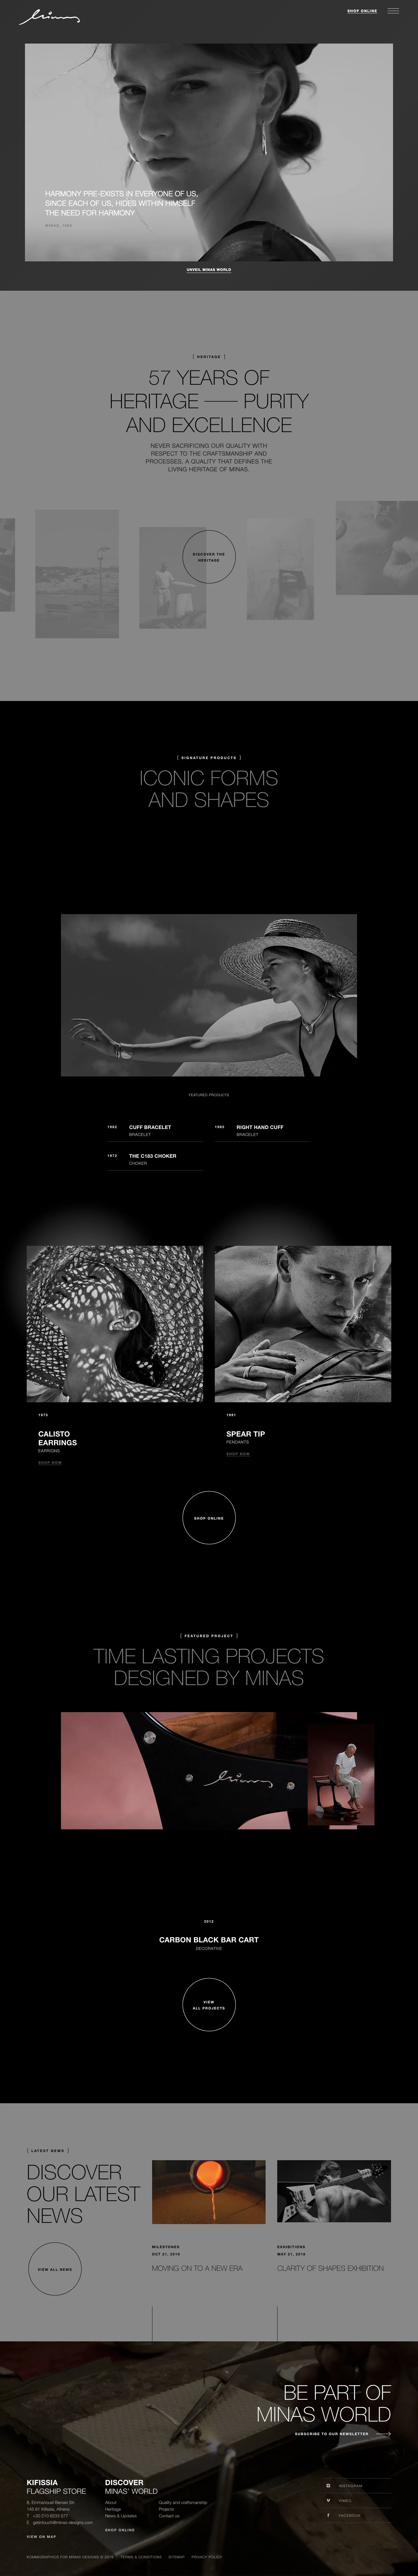 Minas Designs Landing Page Example: Minas lived and worked for 11 years in new york, as a freelancer and established his presence as a designer, creating pieces in gold and silver.